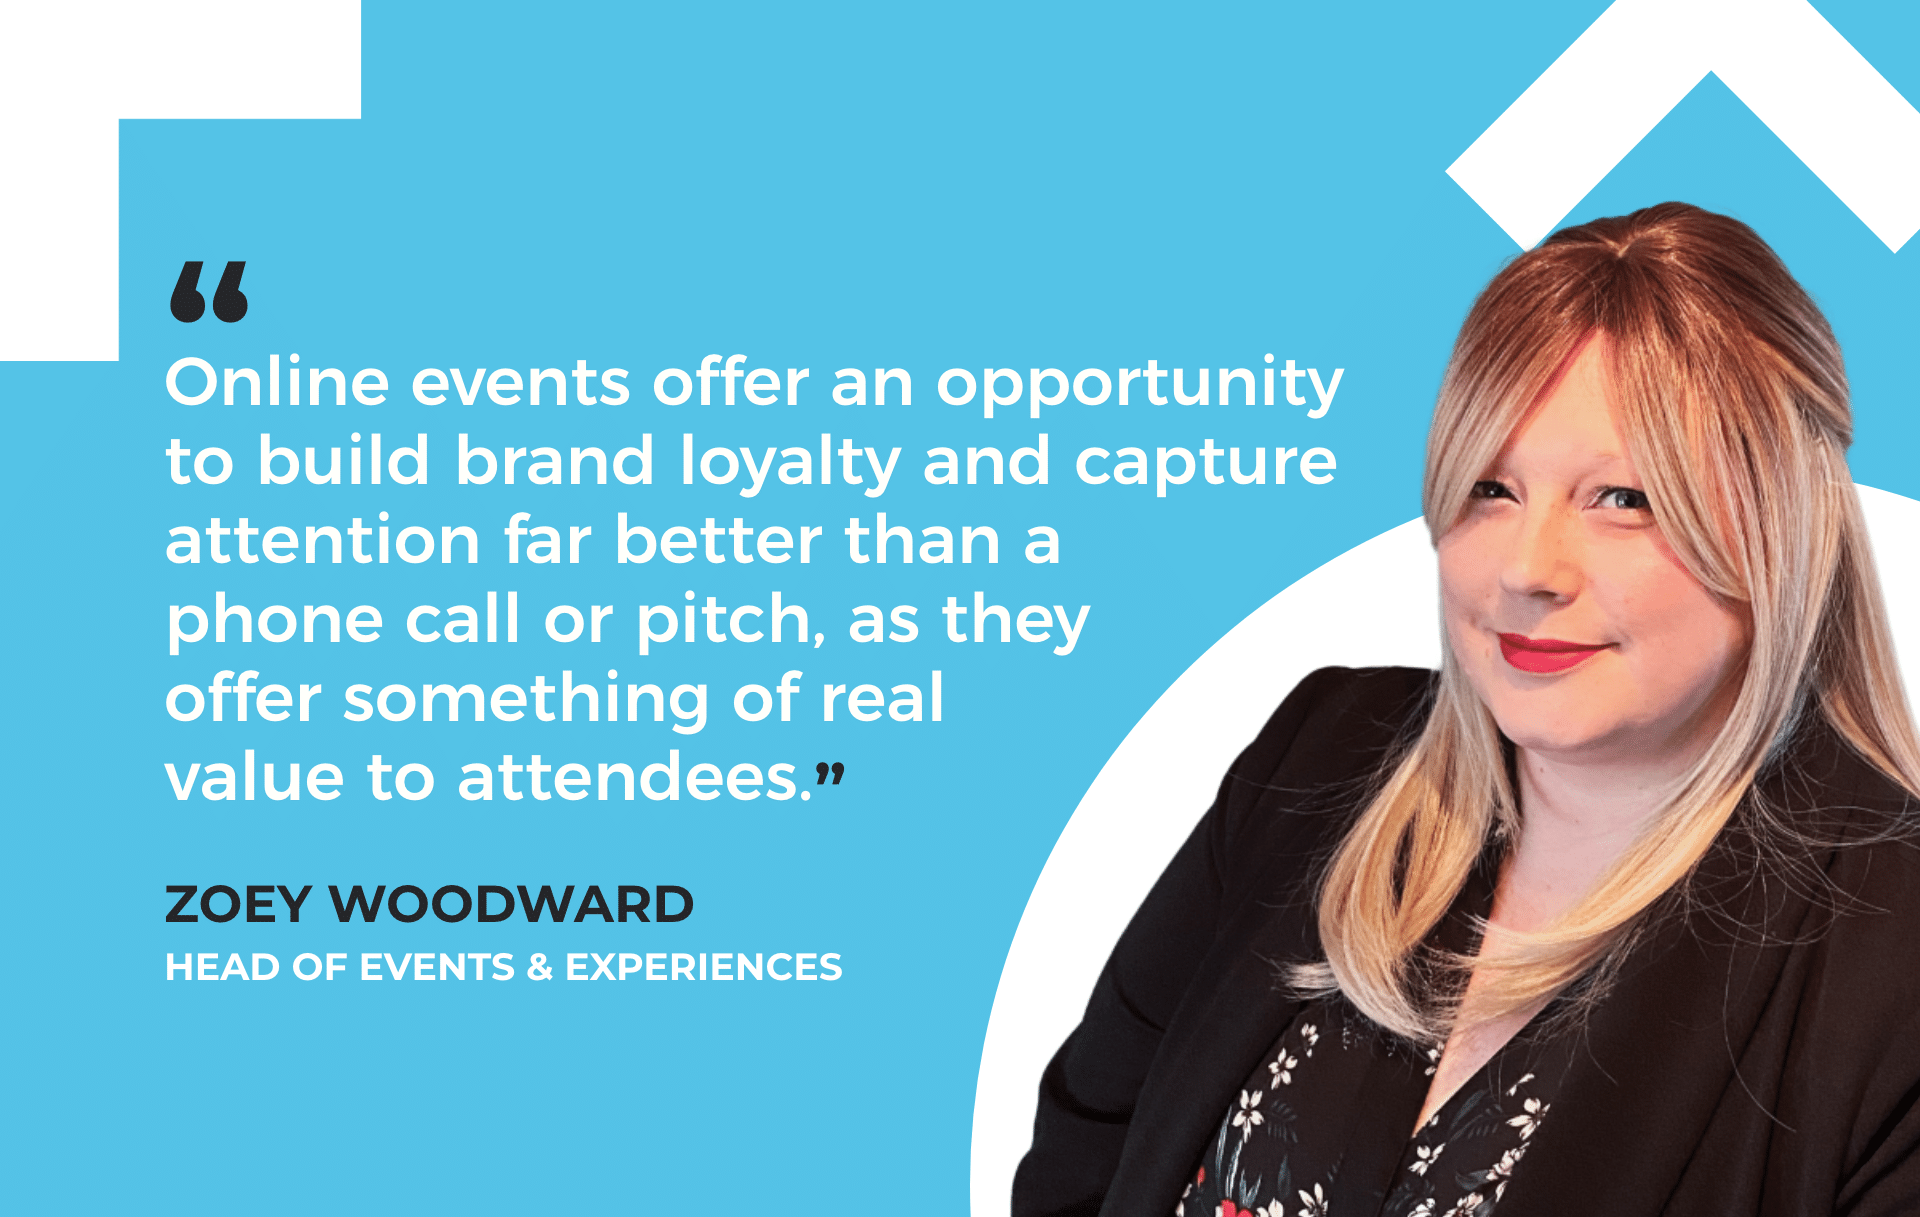 Zoey Woodward events & experiences quote